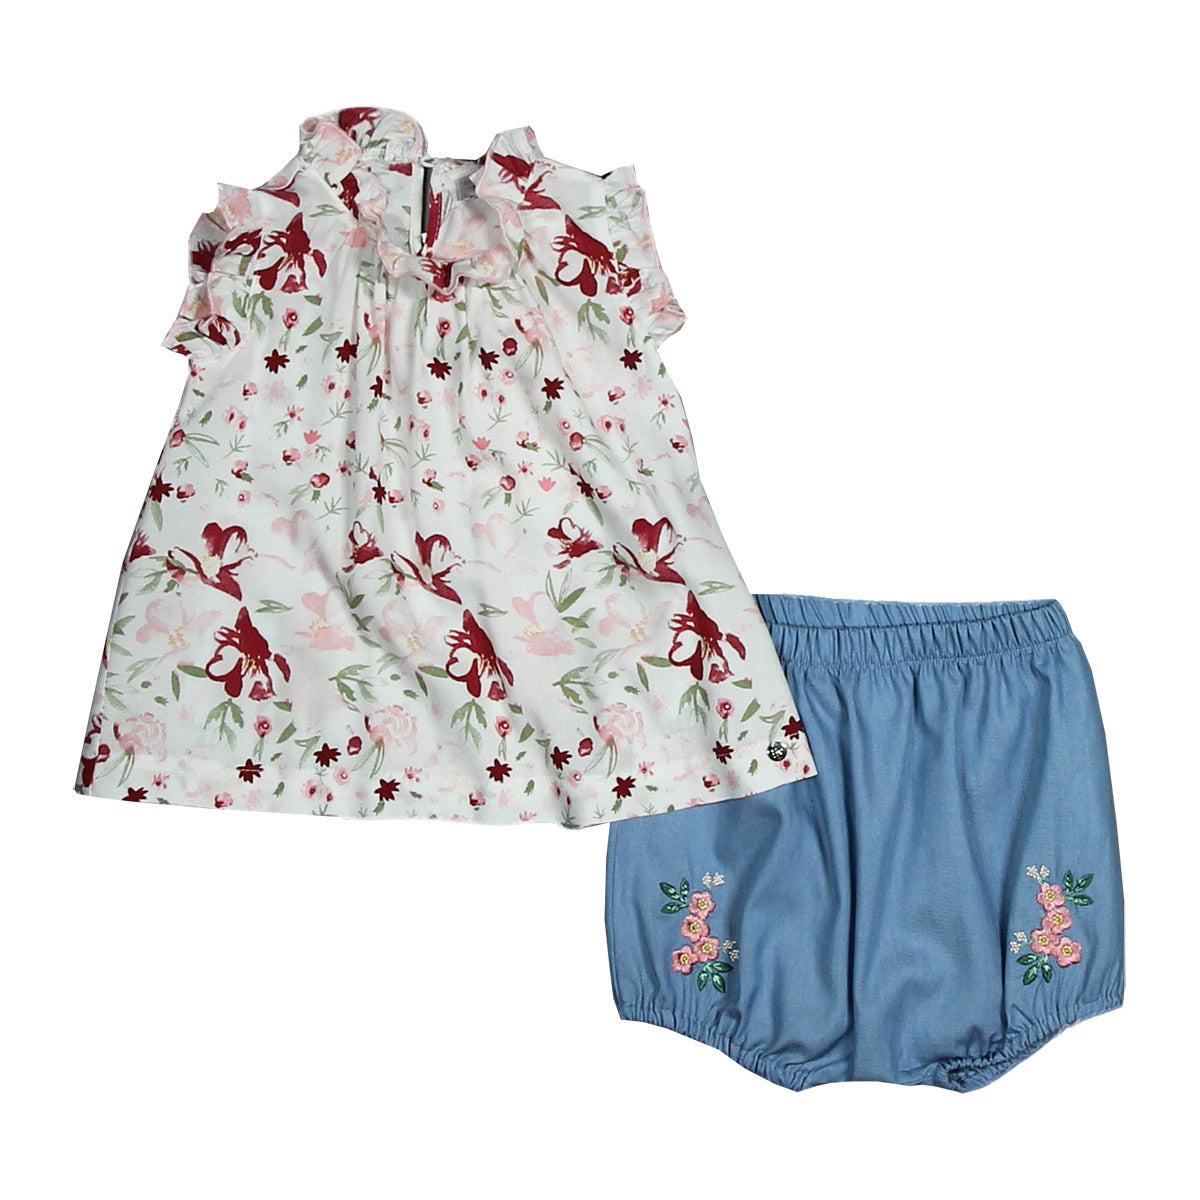 Two-piece set from the Slilvian Heach Kids clothing line, composed of blouse with afloral pattern...